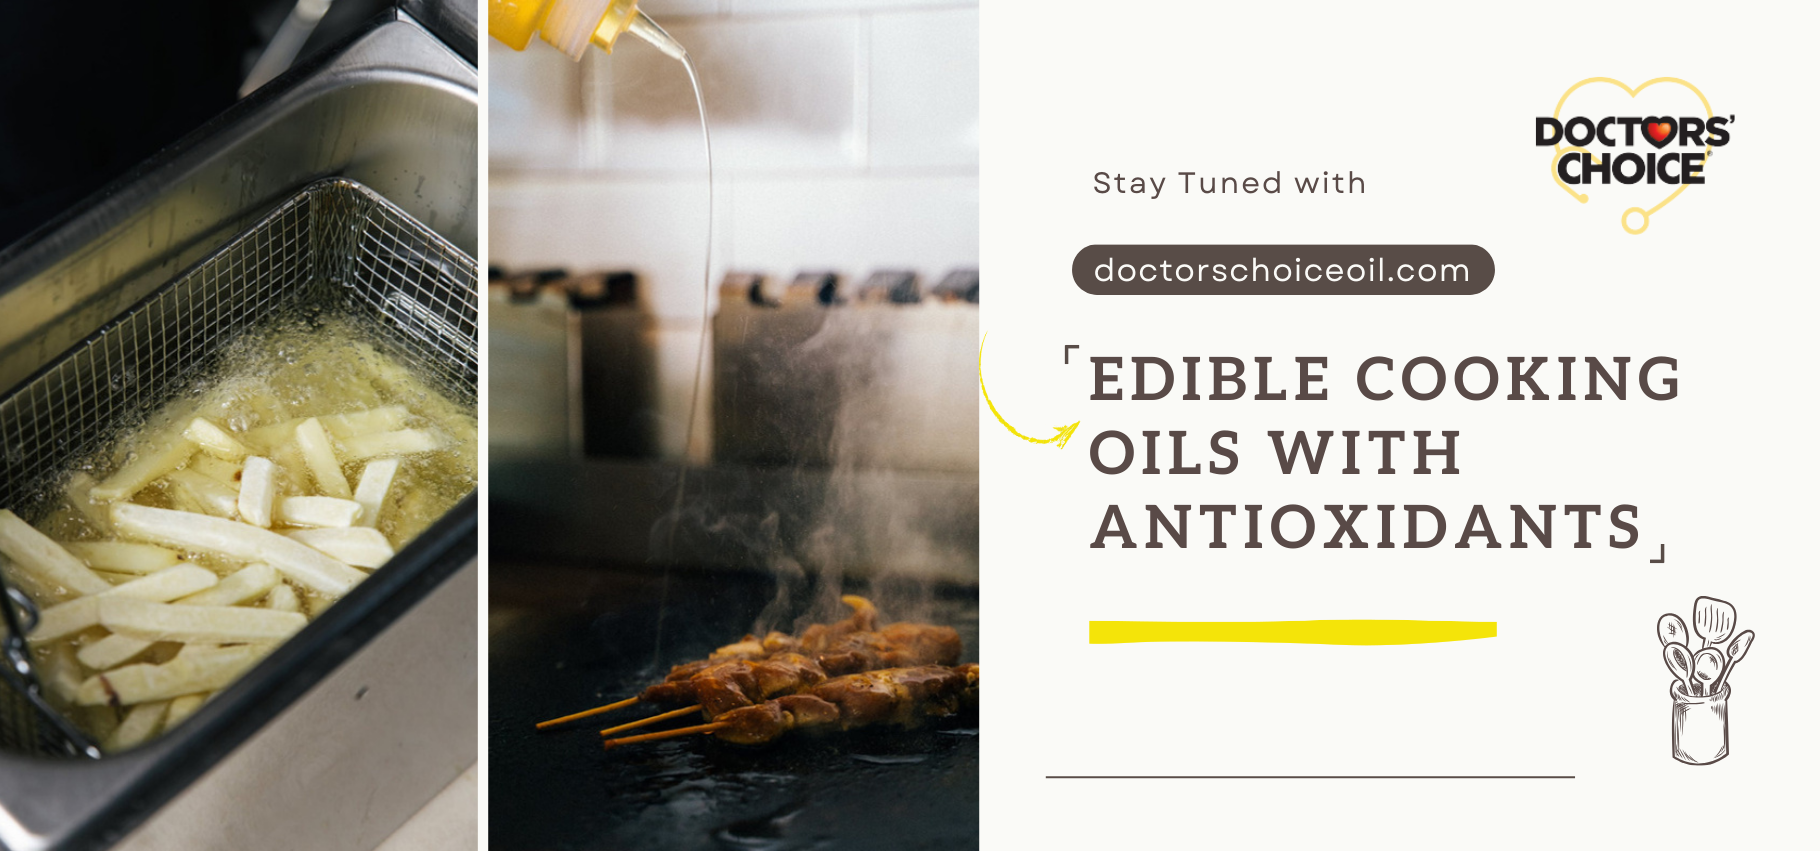 Edible-Cooking-Oils-with-Antioxidants